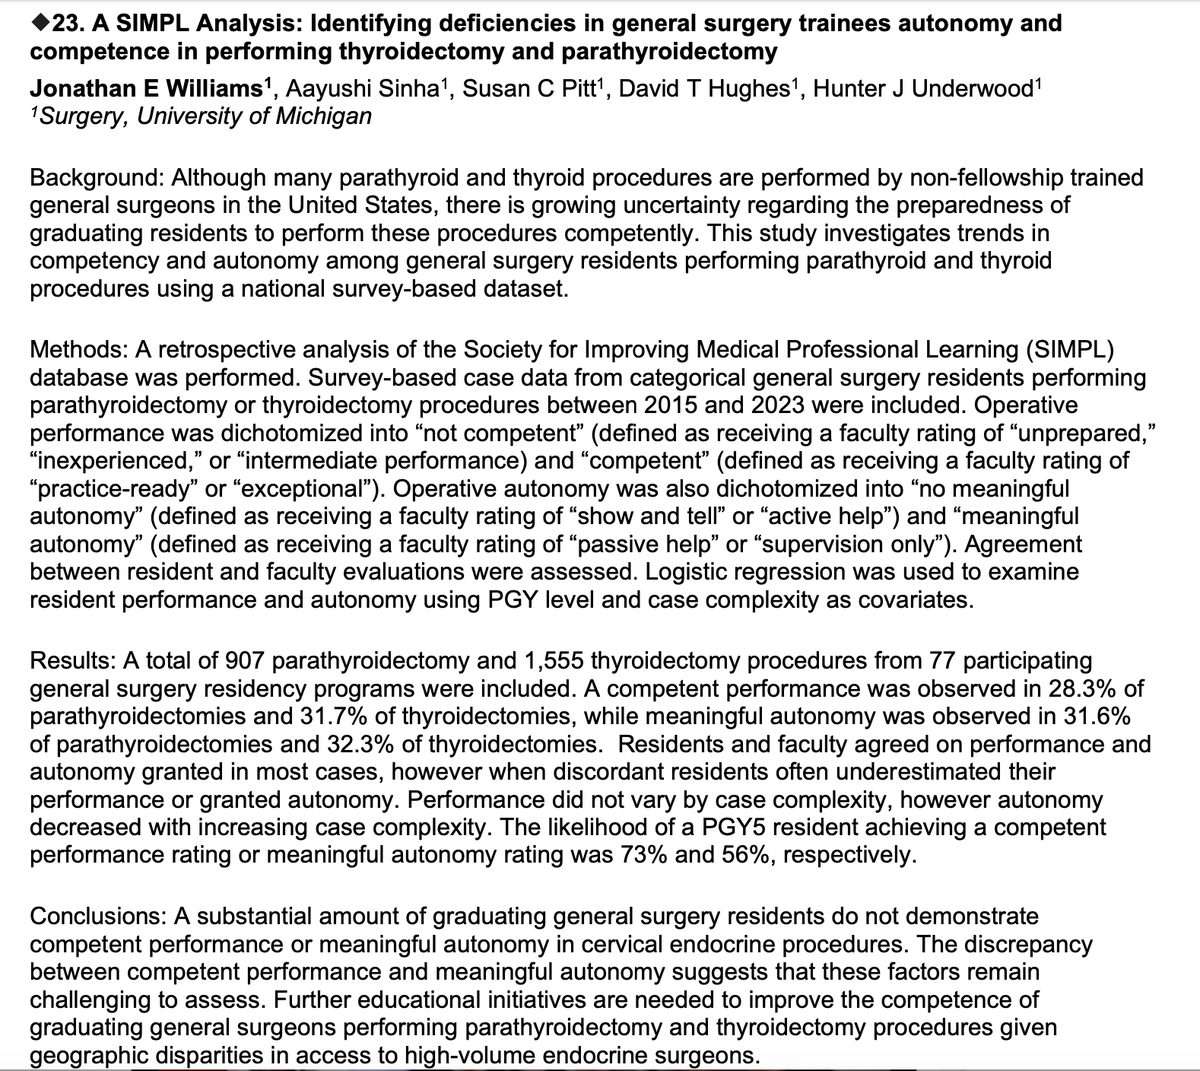 A SIMPL Analysis: Identifying deficiencies in general surgery trainees autonomy and competence in performing thyroidectomy and parathyroidectomy